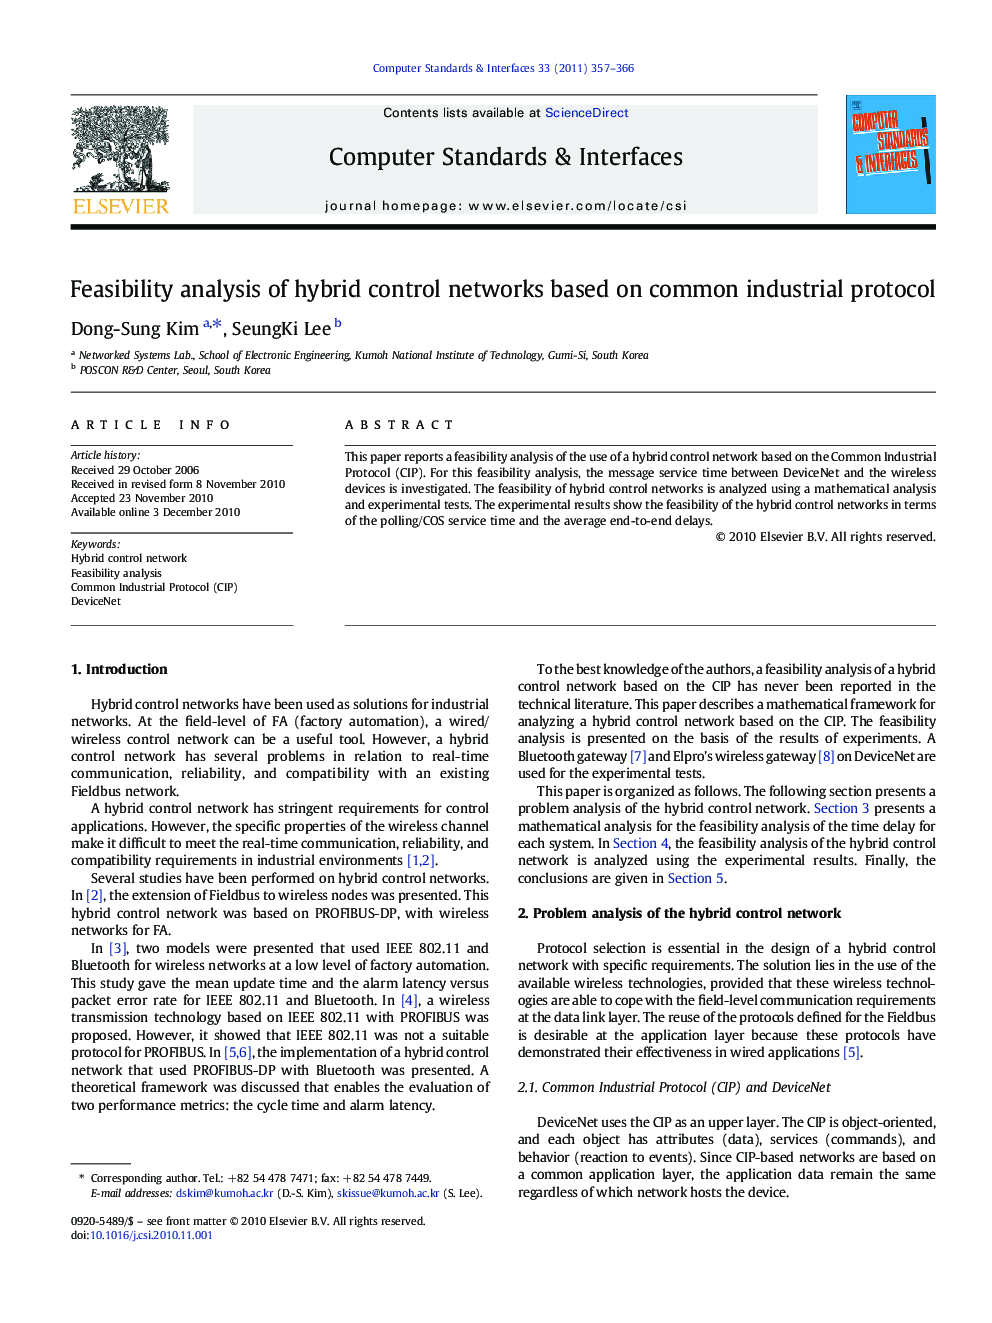 Feasibility analysis of hybrid control networks based on common industrial protocol